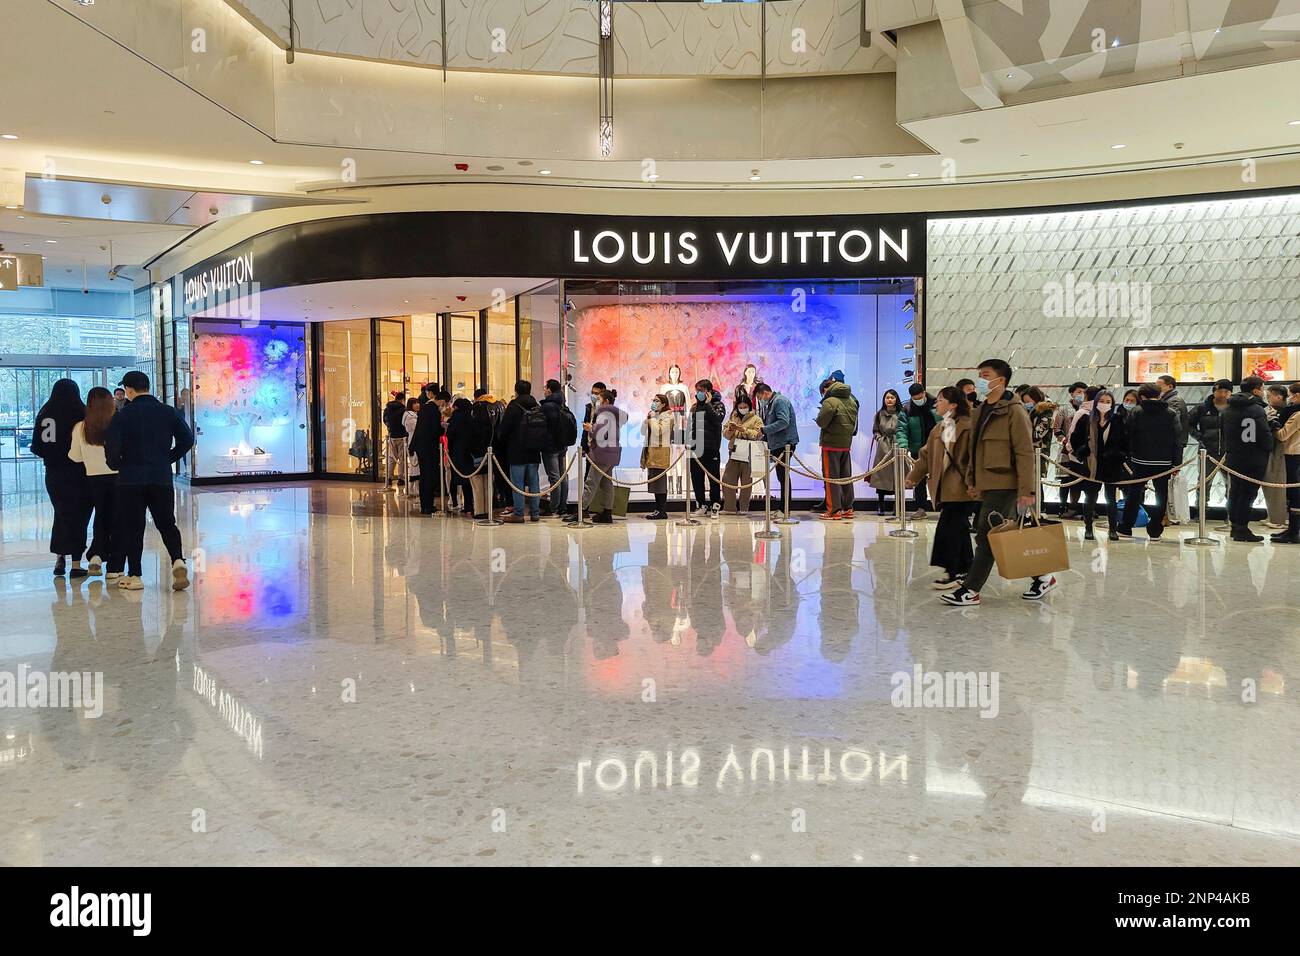 People line up in front of a Louis Vuitton store in Shanghai